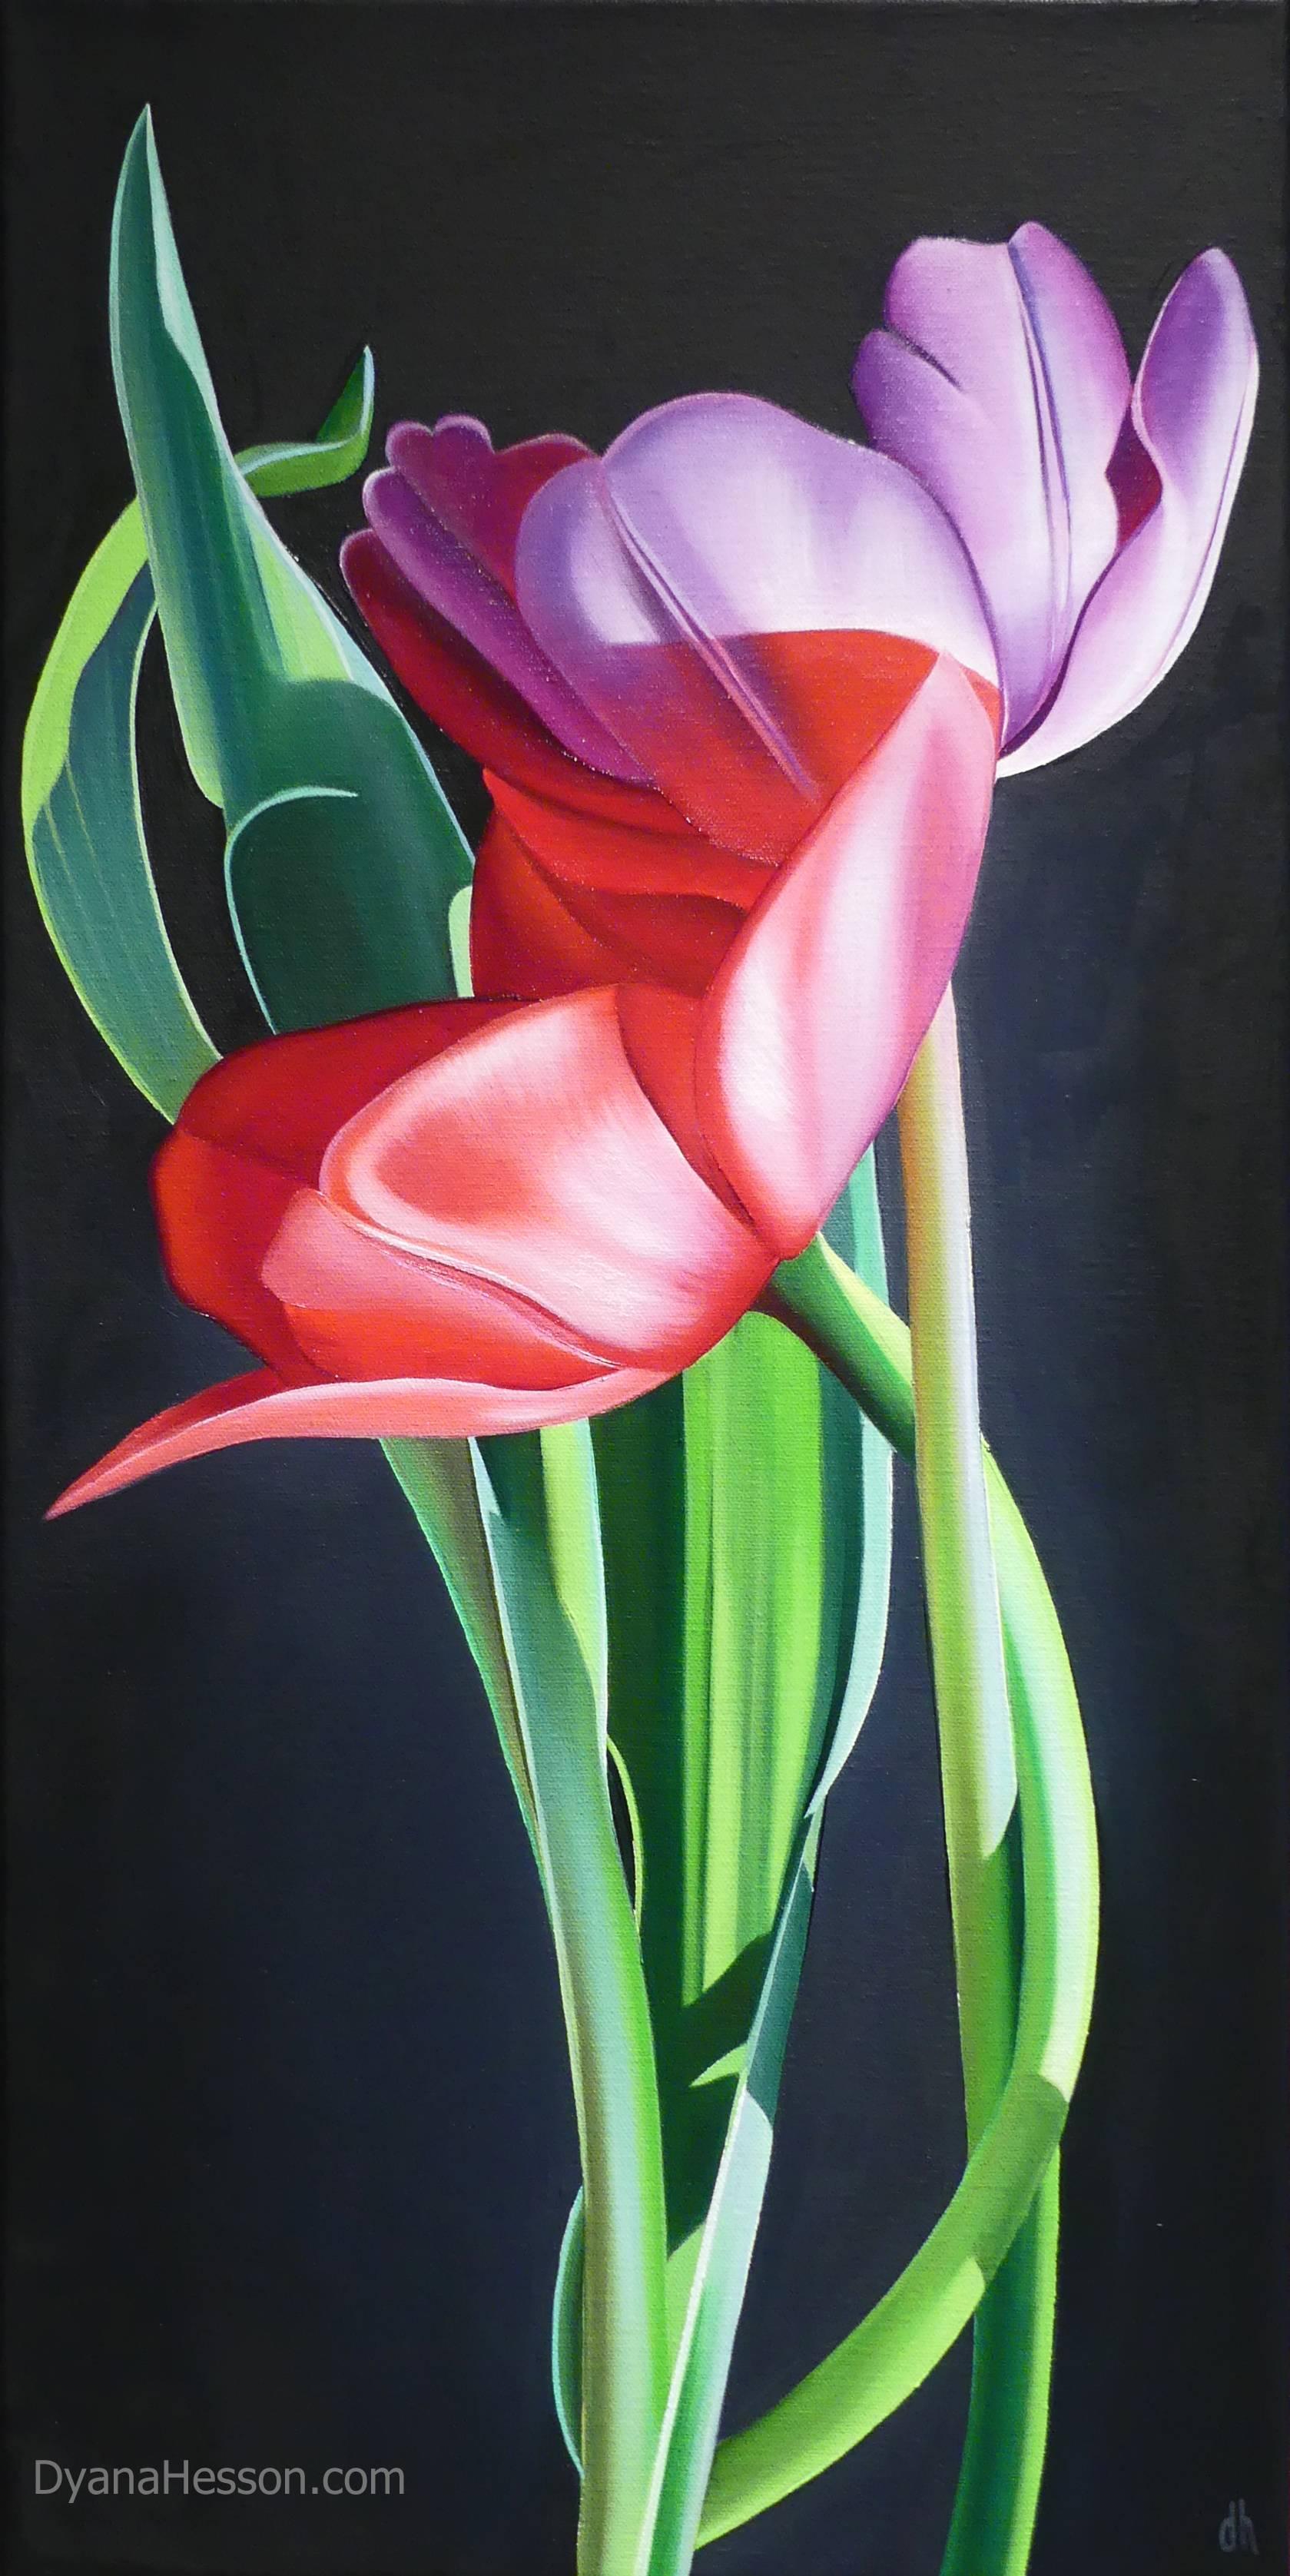 Dyana Hesson Figurative Painting - "It's the Little Things, Two Tulips"